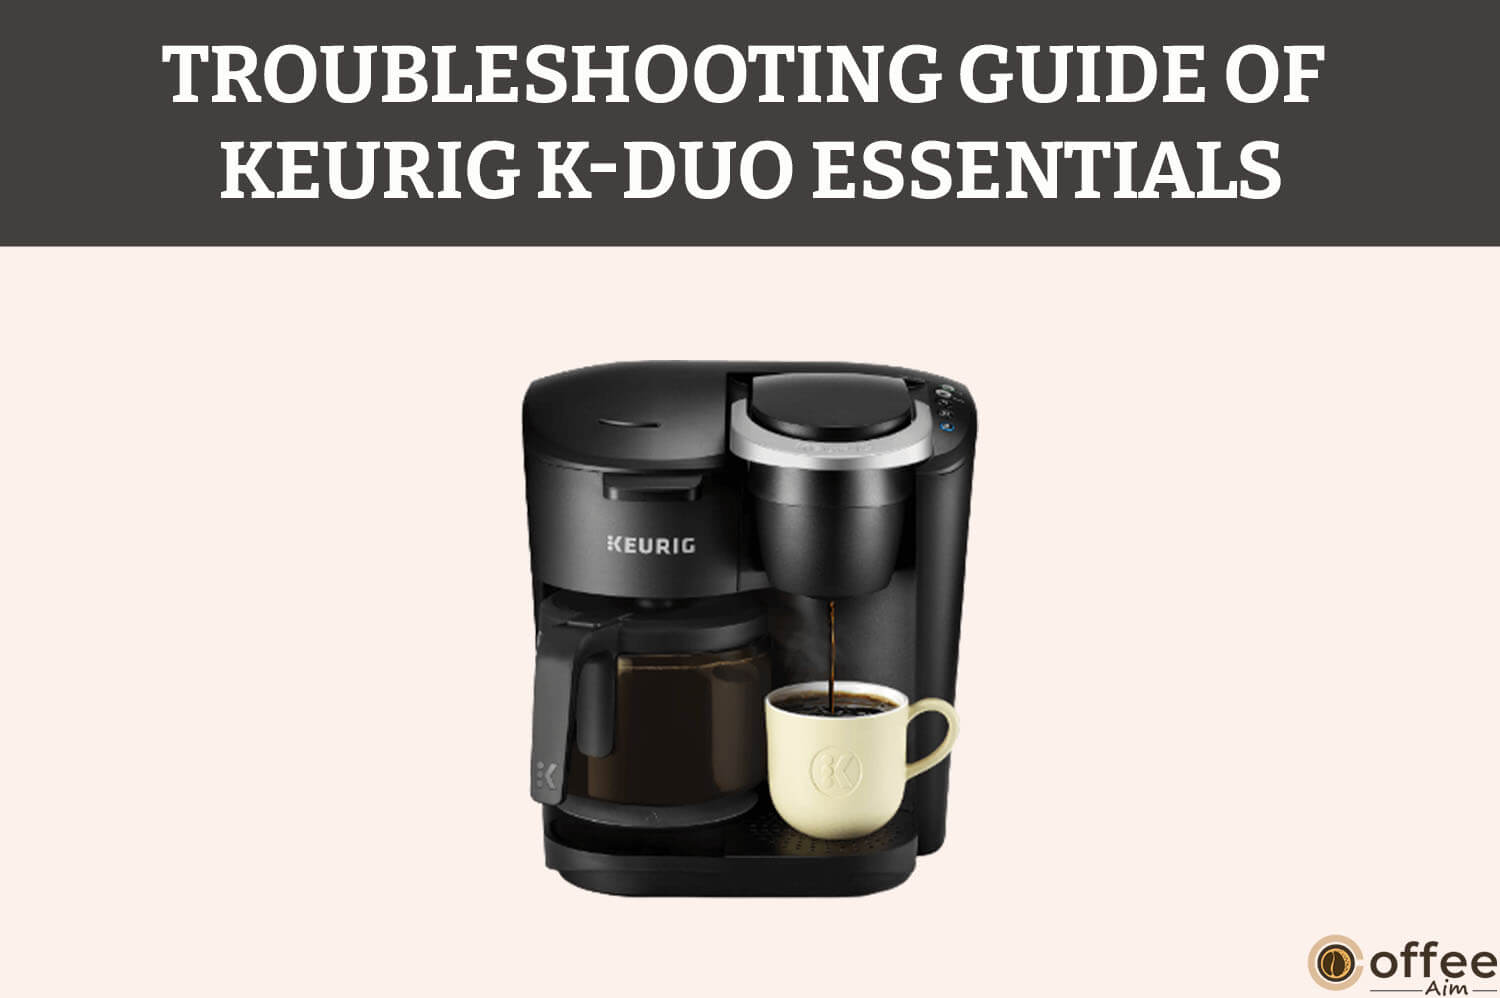 Featured image for the article "Troubleshooting of Keurig K-Duo Essentials"